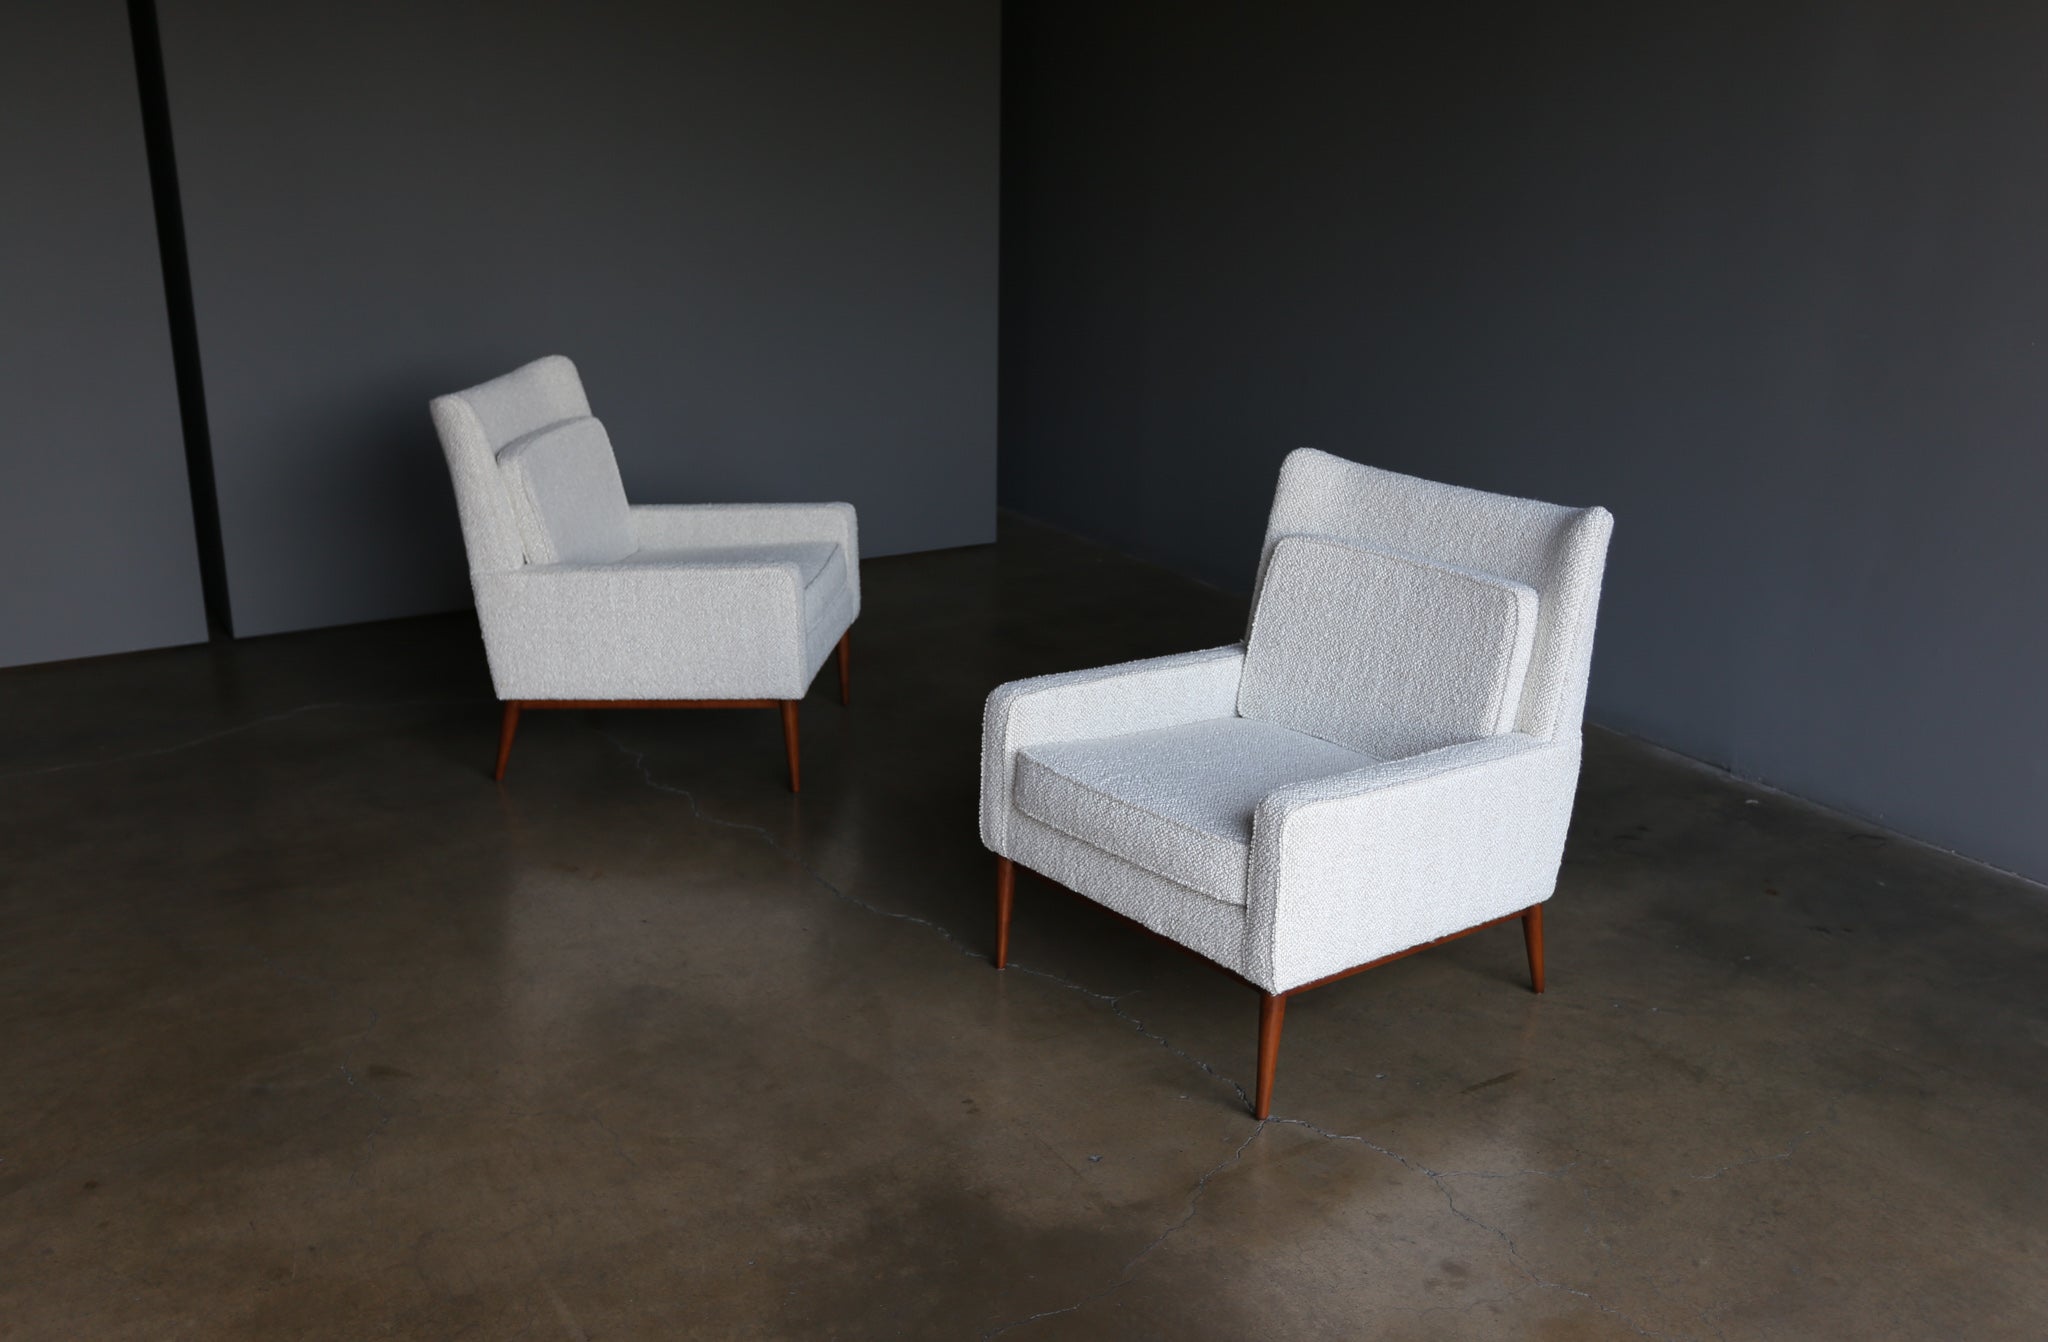 = SOLD = Paul McCobb Lounge Chairs for Directional, circa 1955